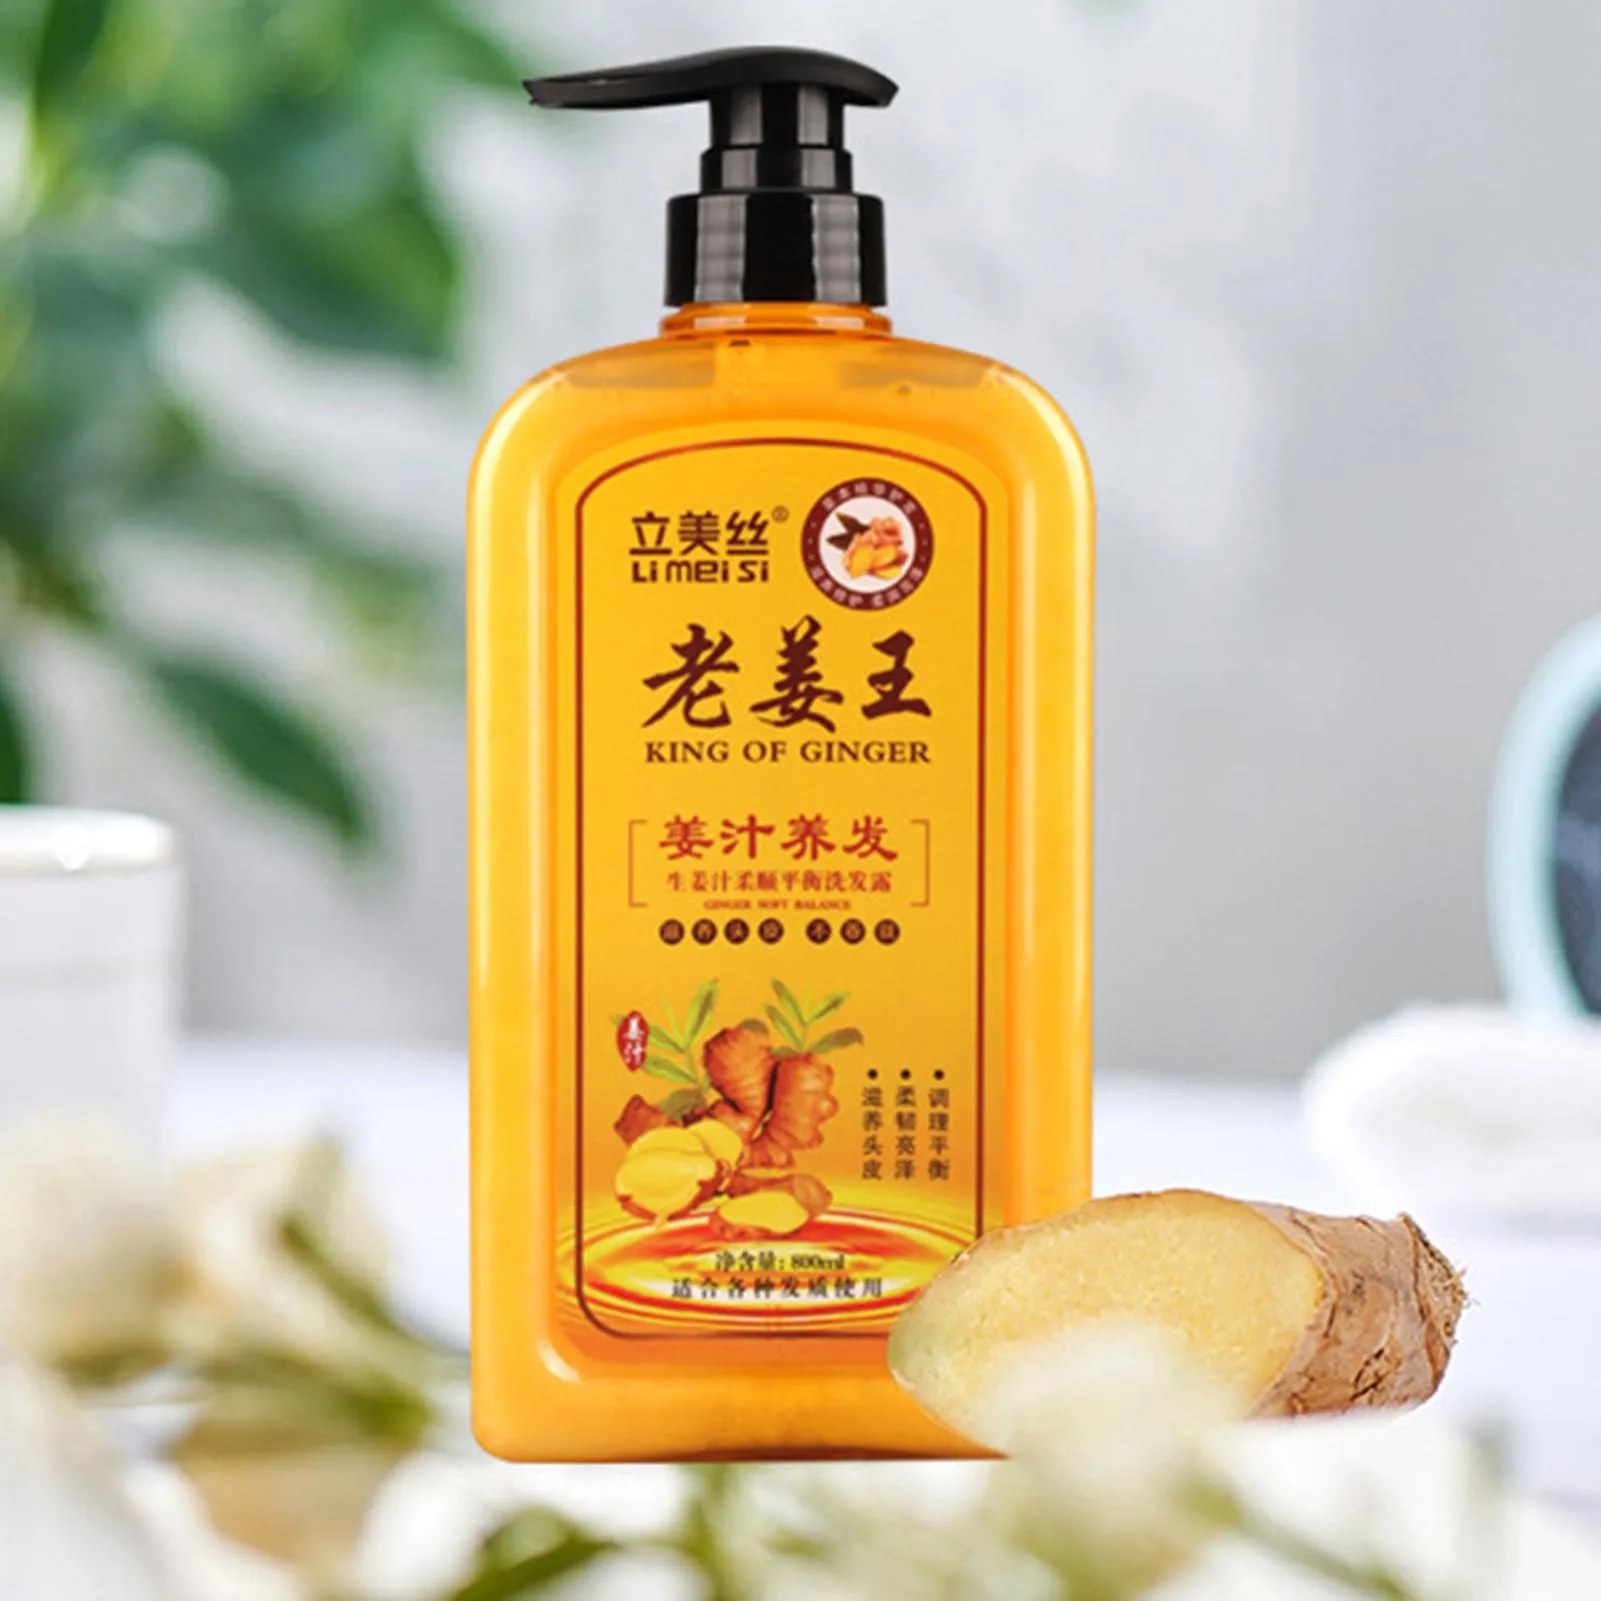 

Ginger Nourishing Hair Shampoo Effective Natural Plant Healthy Shampoo for Hair Condition Improving PR Sale